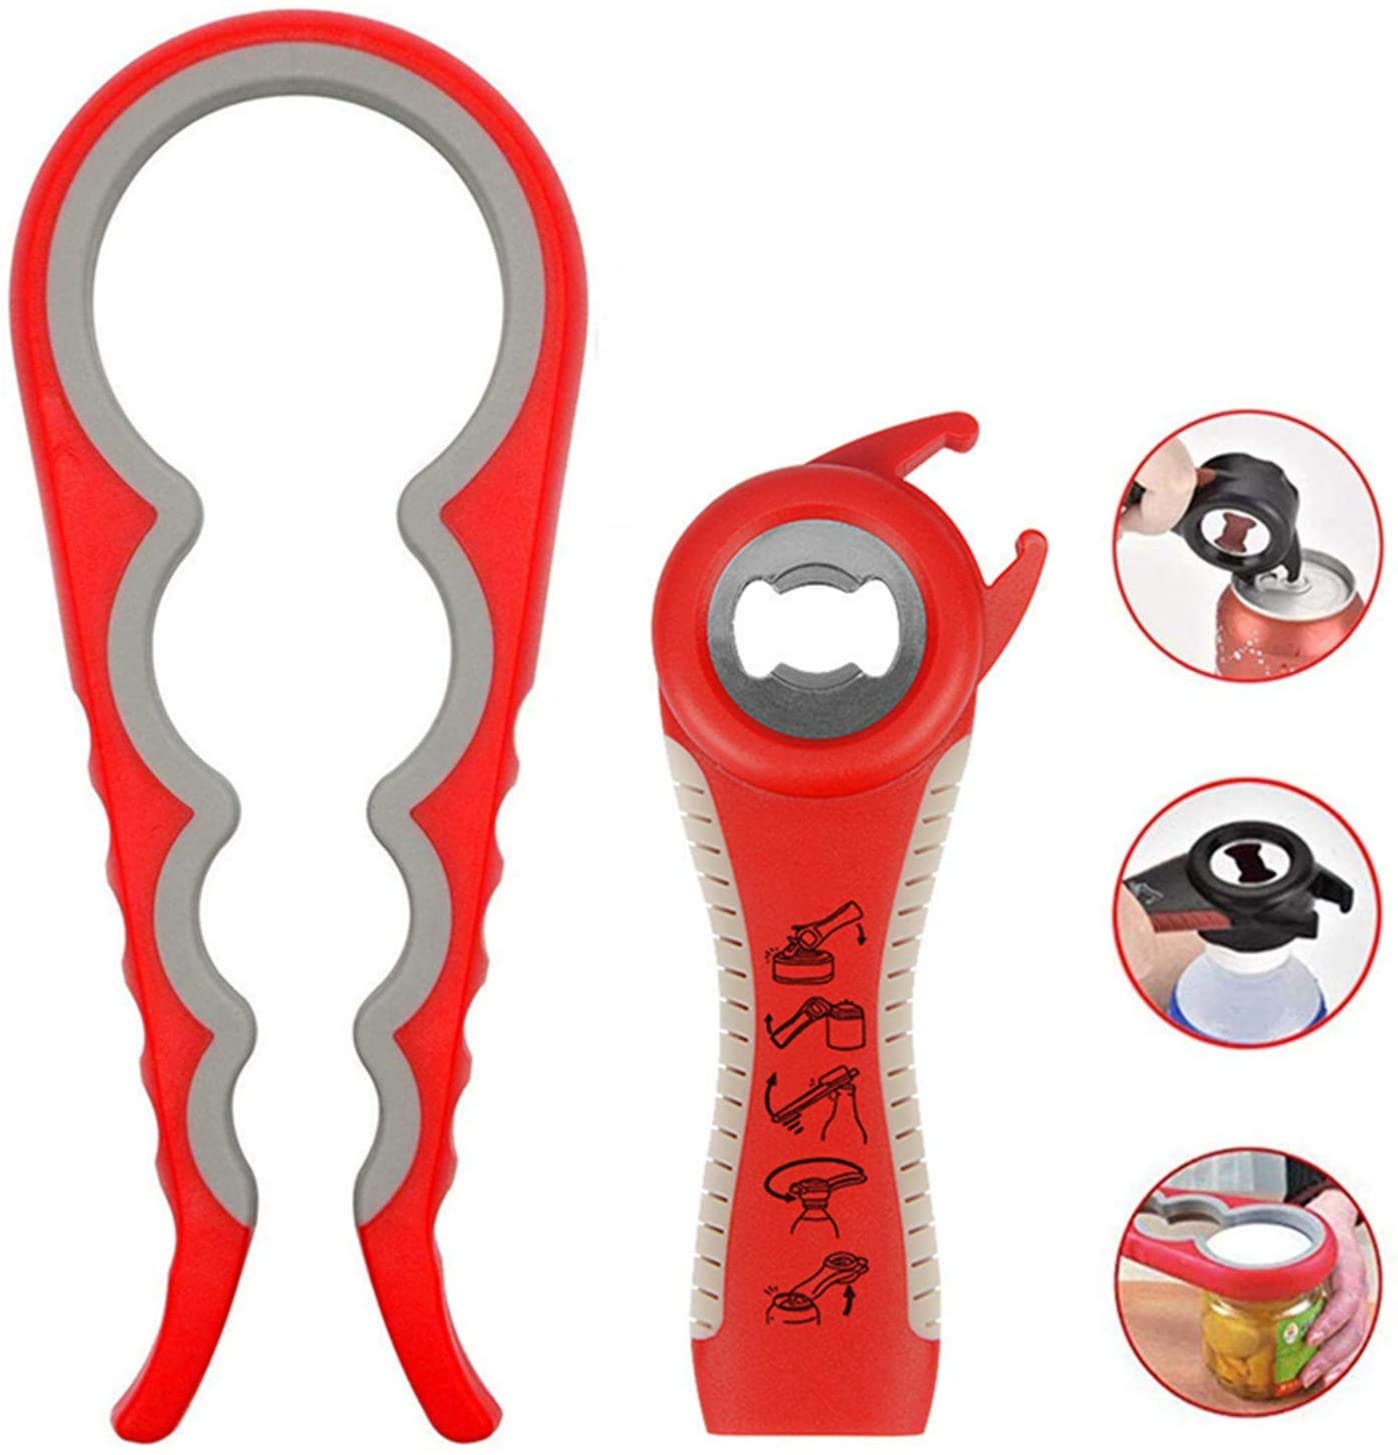 Jar Opener,Manual Can Opener,Bottle Opener Can Openers for Seniors with Arthritis,Weak Hands, 5-in-1 Multi Kitchen Tools Set for Children, Women and Seniors (Red)